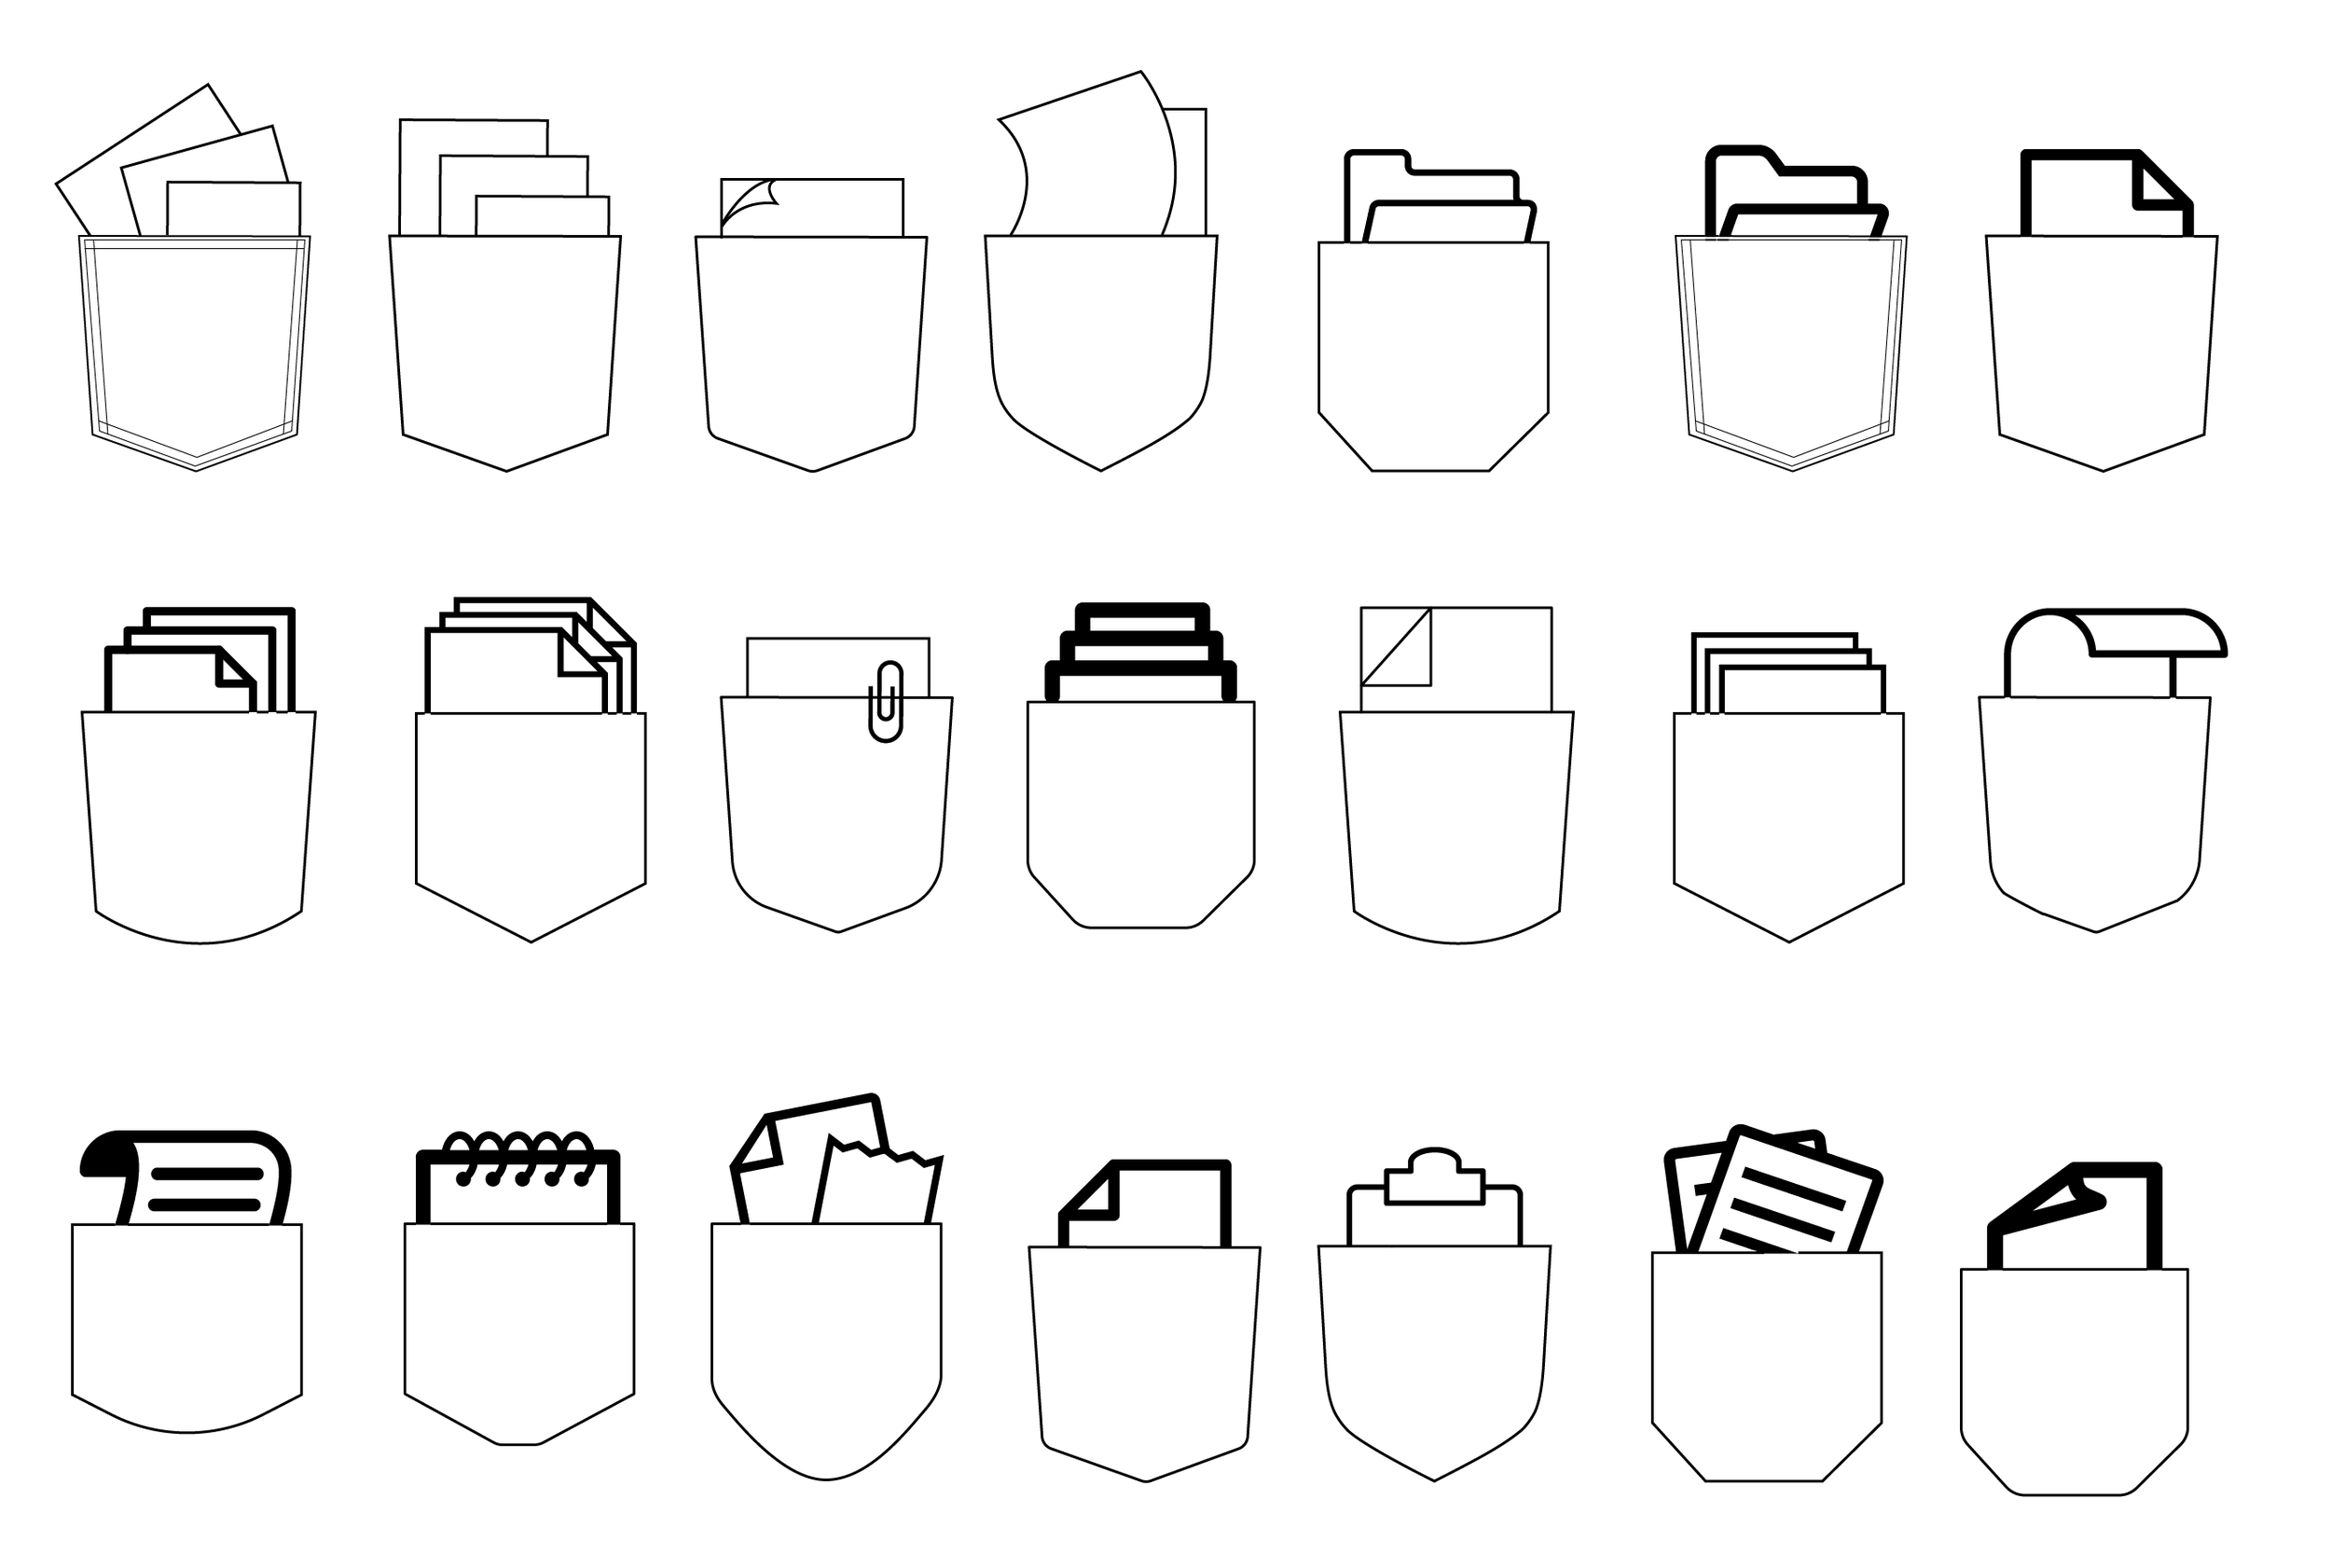 Pocket Icon_Shapes_1.png